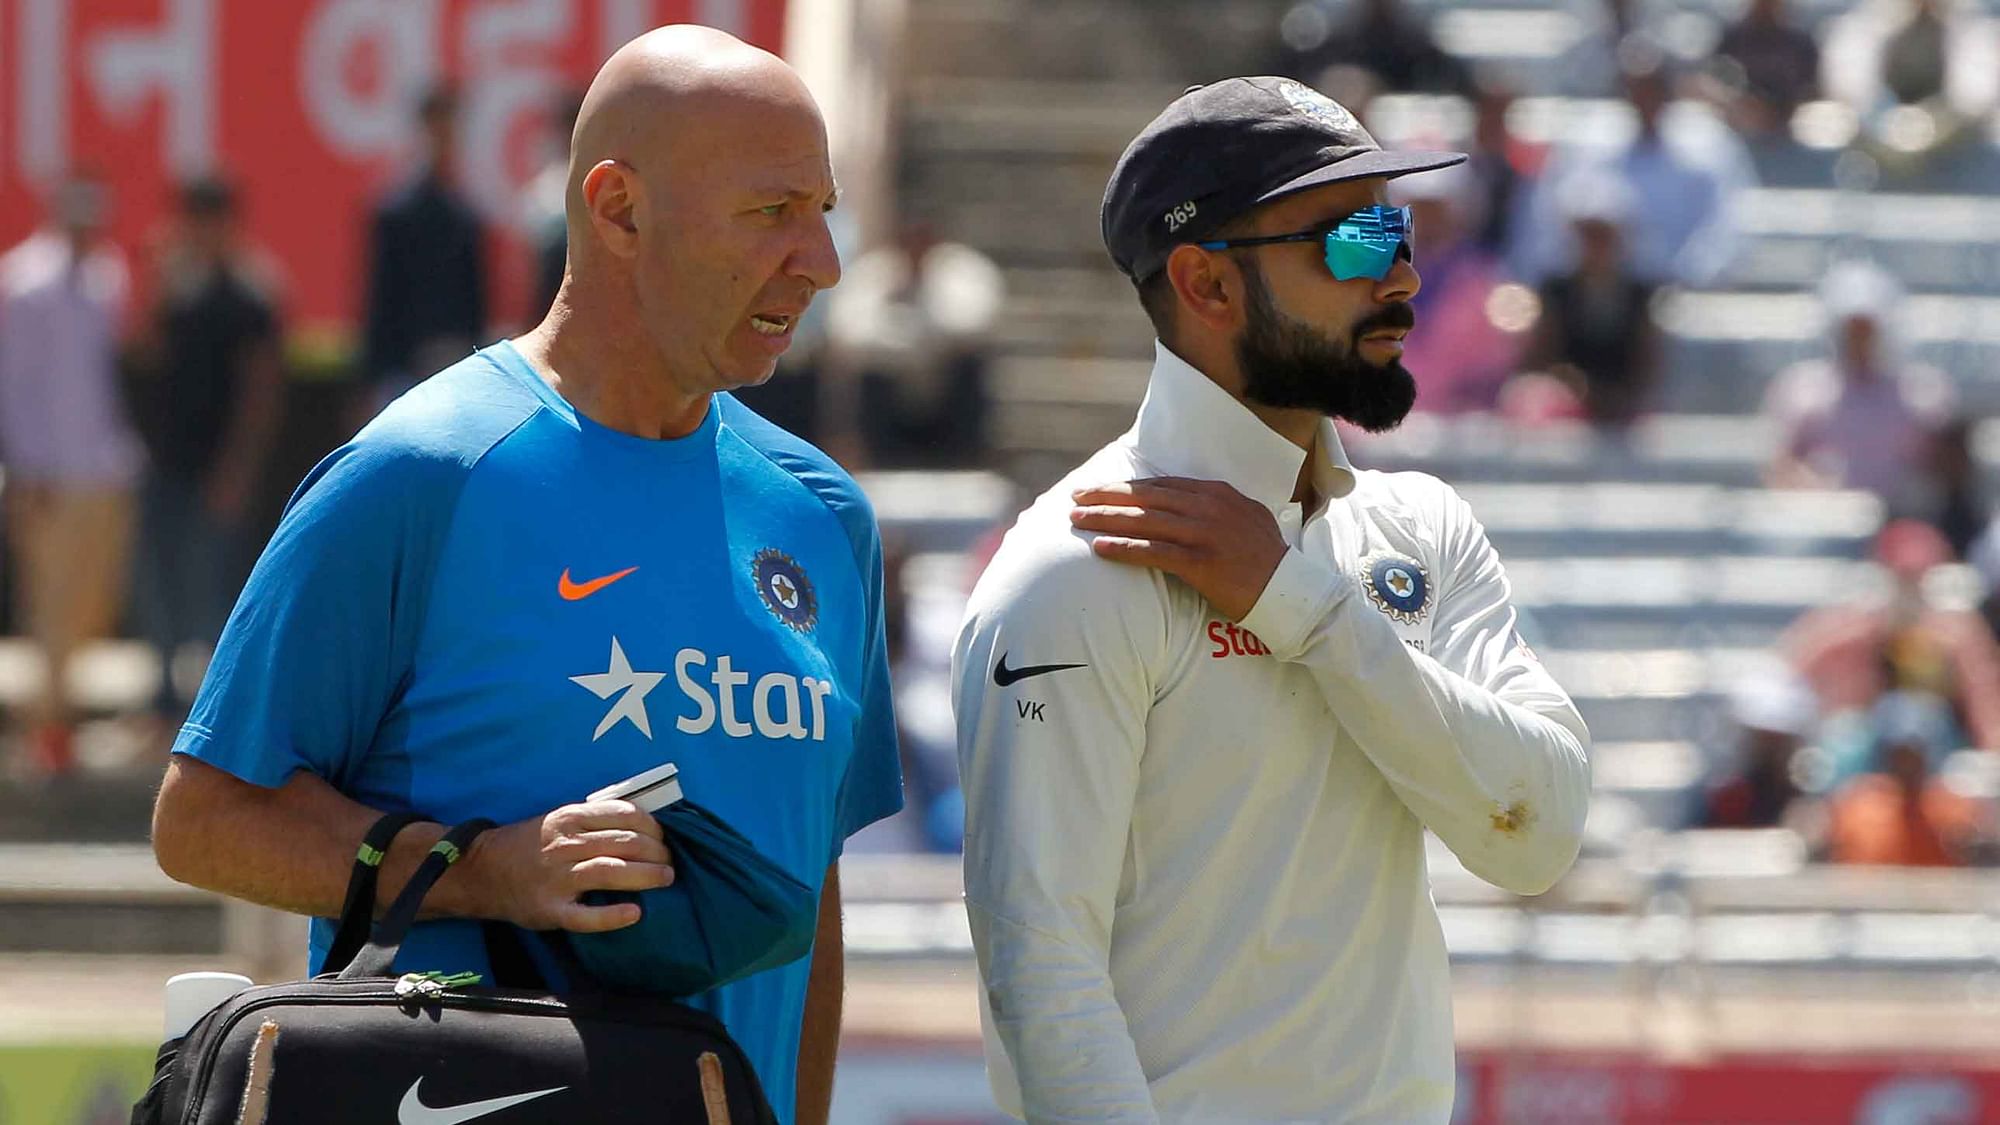 Virat Kohli walks off the field with the physio after injuring his shoulder during the Ranchi Test. (Photo Courtesy: BCCI)